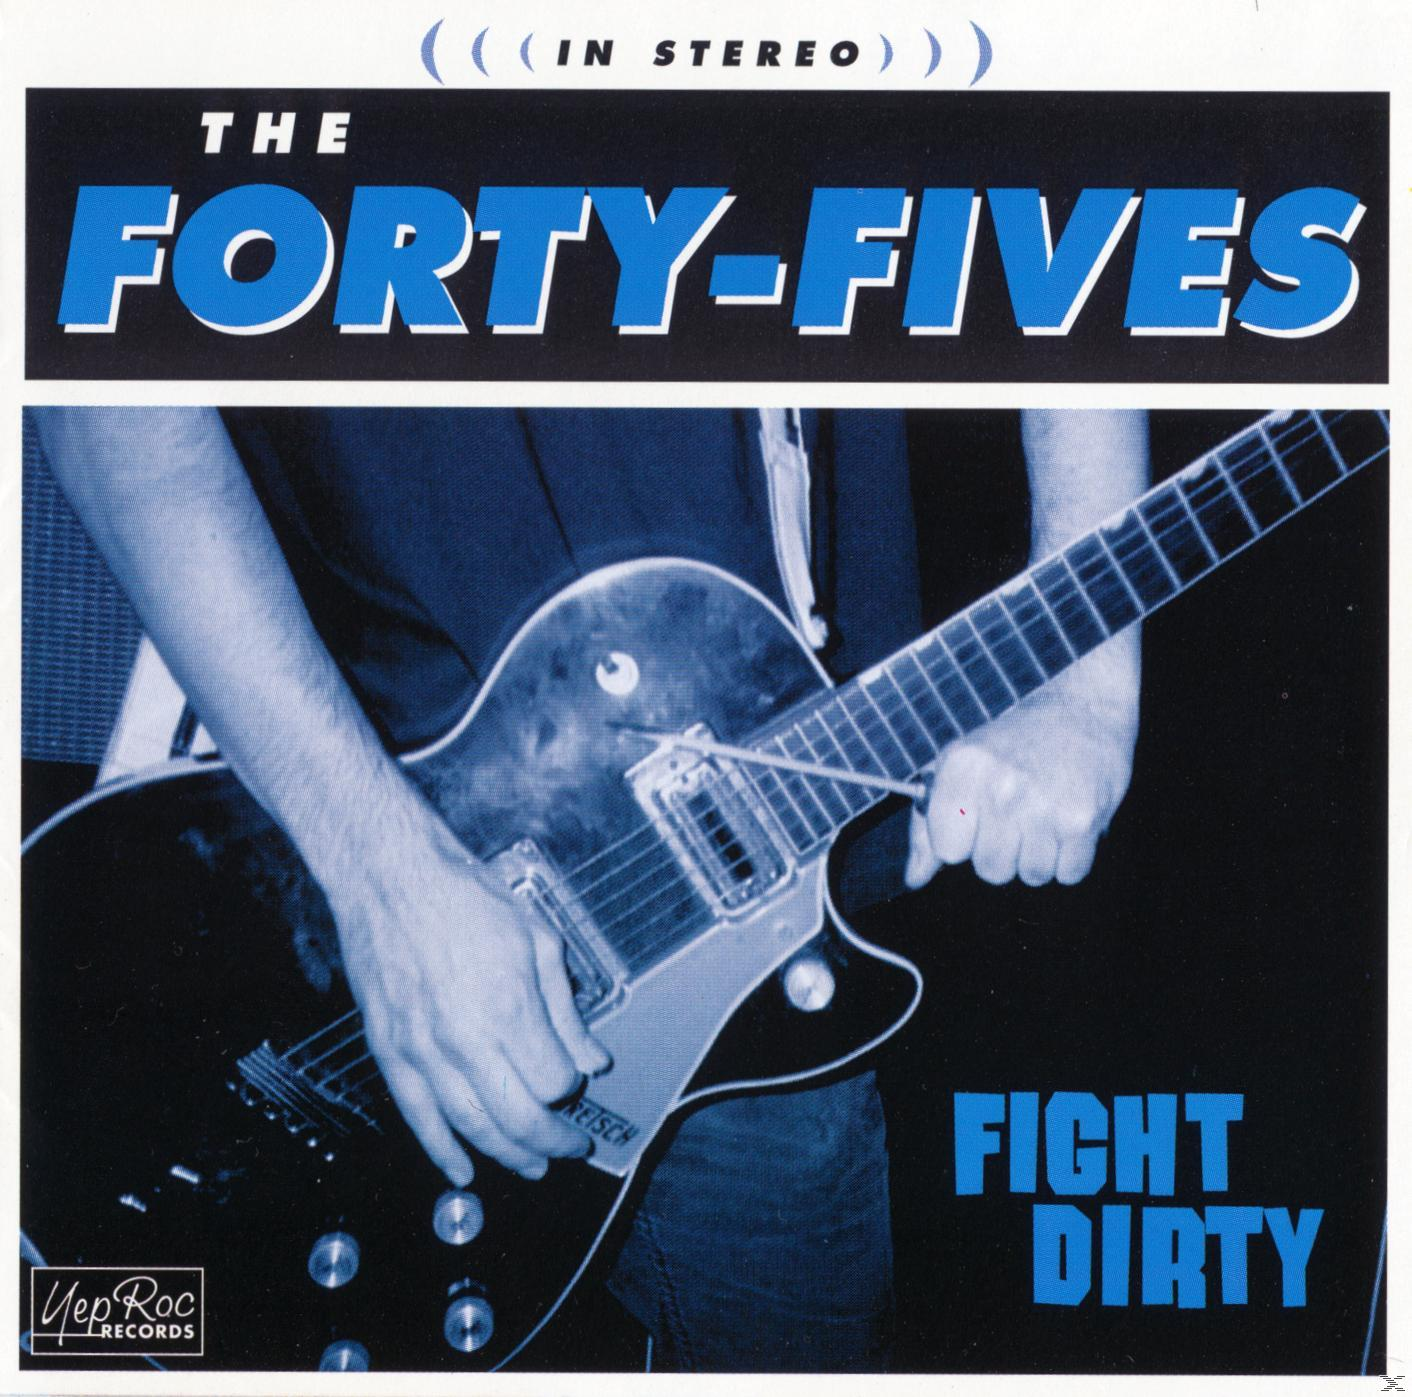 Forty-fives - Dirty - Fight (CD)